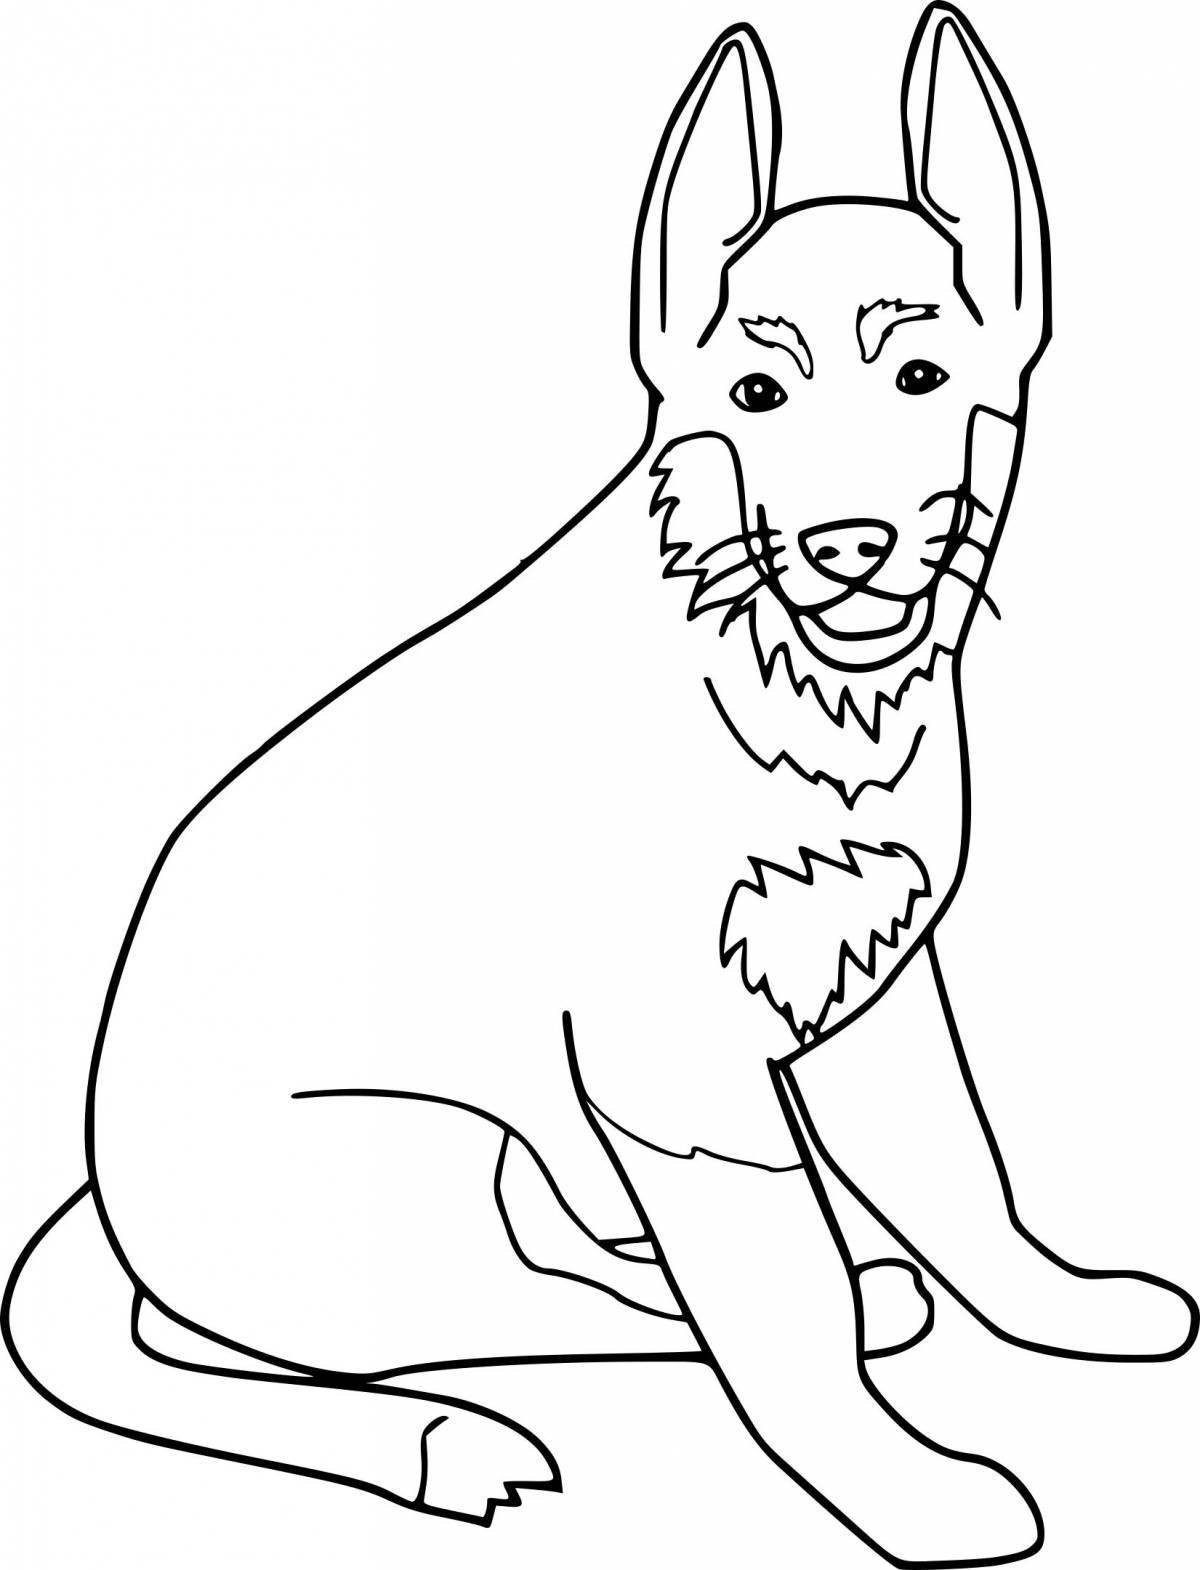 Funny shepherd coloring book for kids